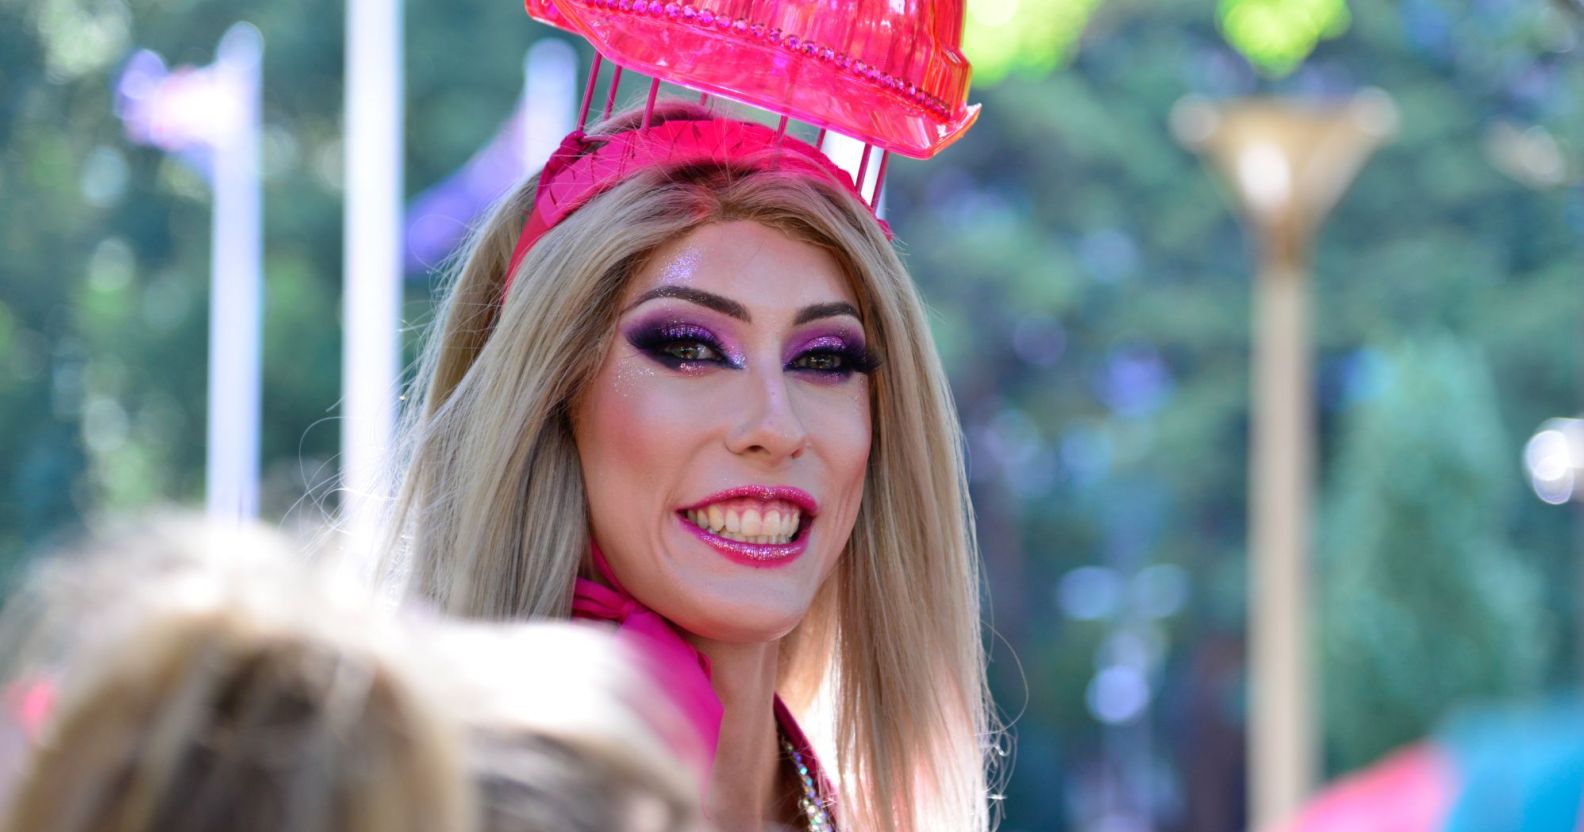 A drag queen smiling during a Pride parade.